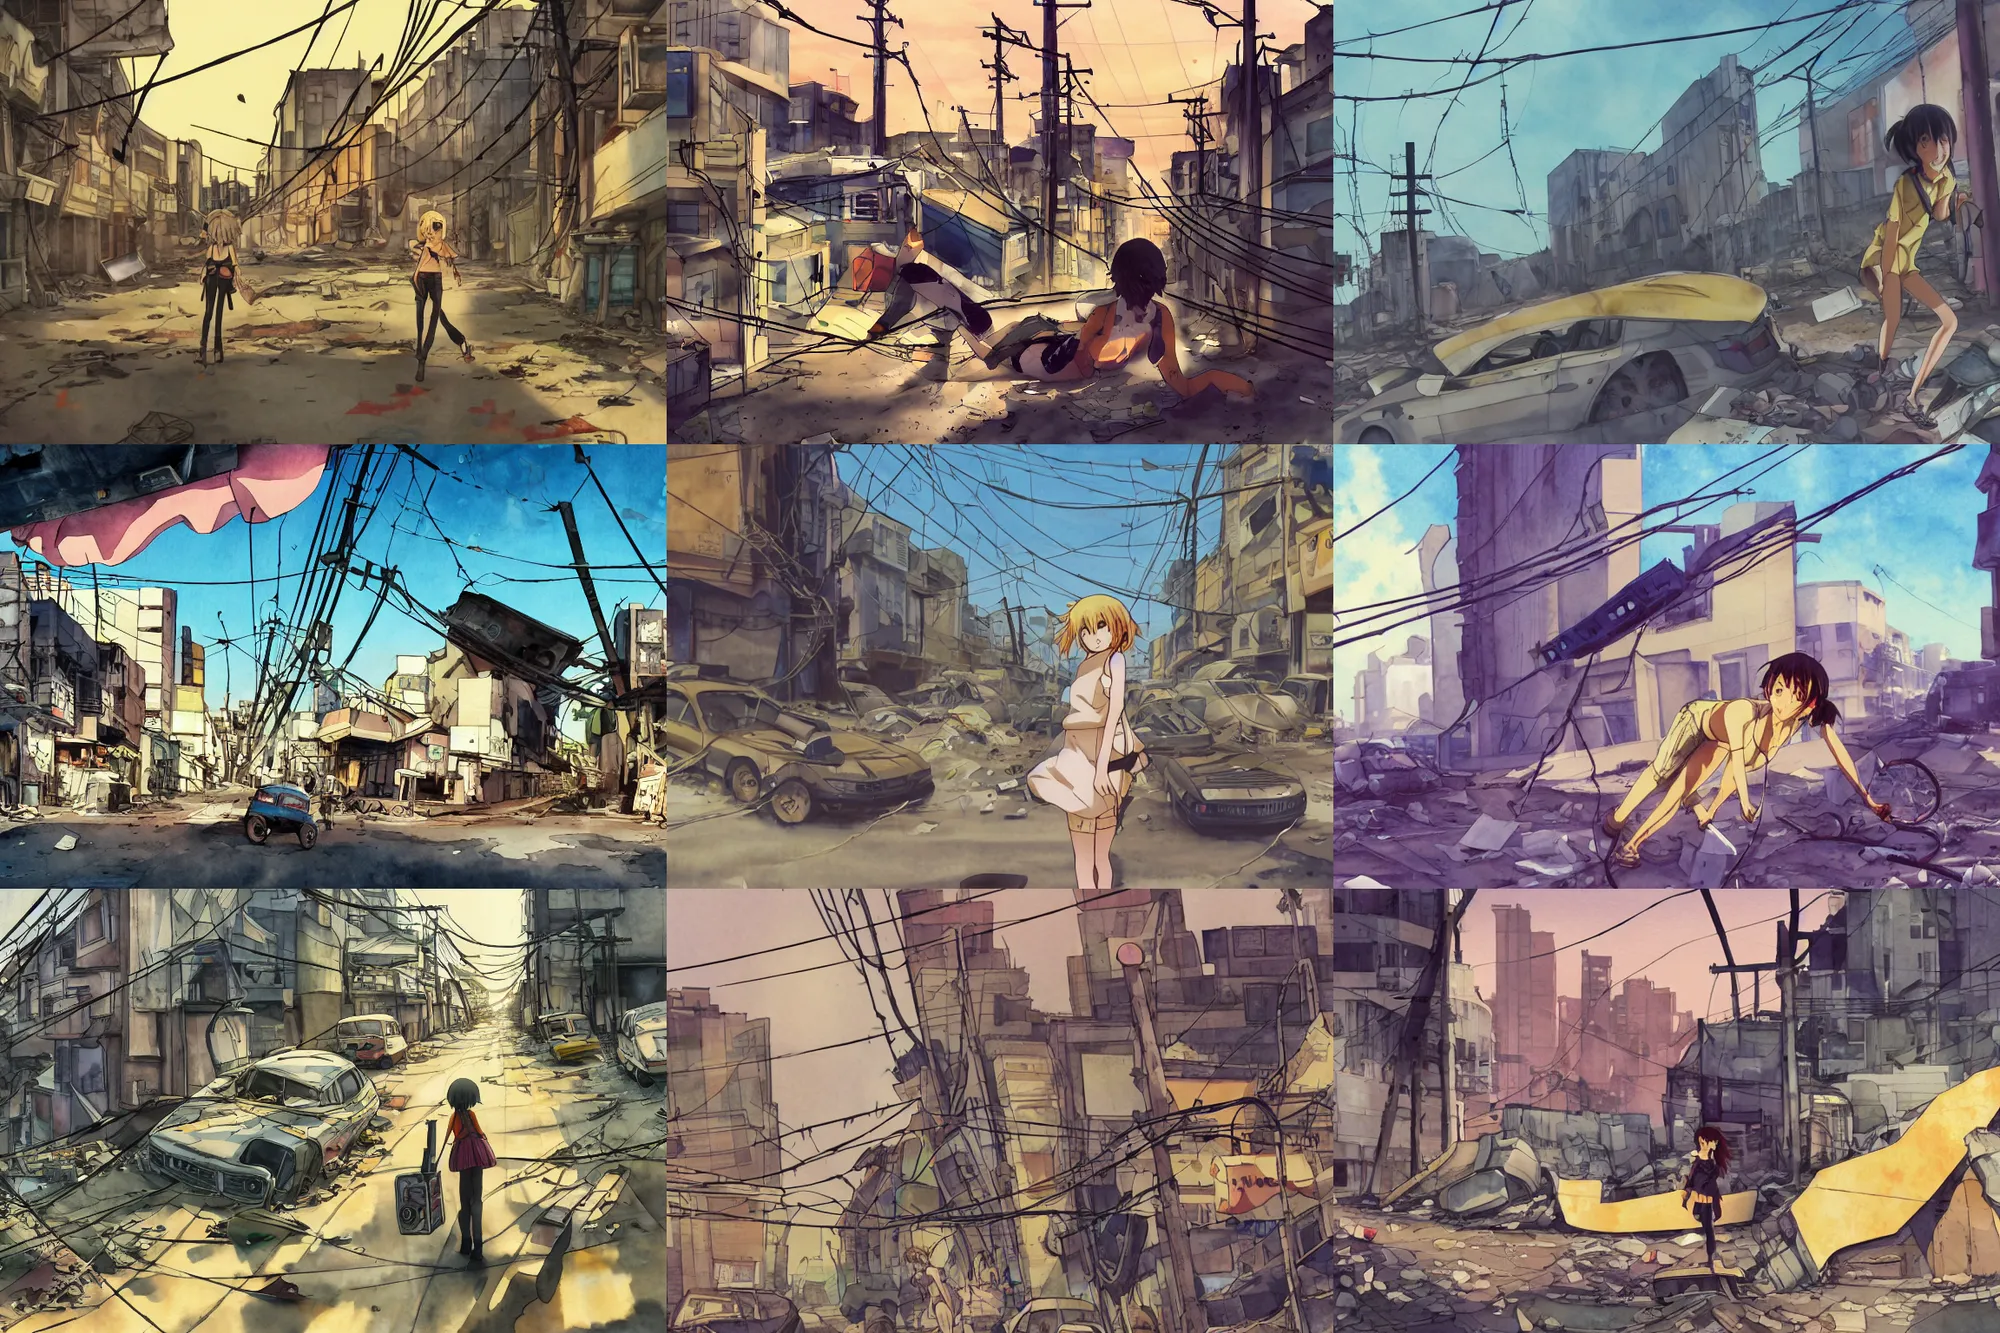 Prompt: anime movie screenshot, curvilinear, simple watercolor, harsh bloom lighting, rim light, abandoned city, drawn girl climbing a giant dead astronaut corpse crashed in deserted dusty shinjuku junk town, tangled overhead wires, telephone pole, old pawn shop, broken tv, harsh shadows, pale yellow sky, bold graffiti